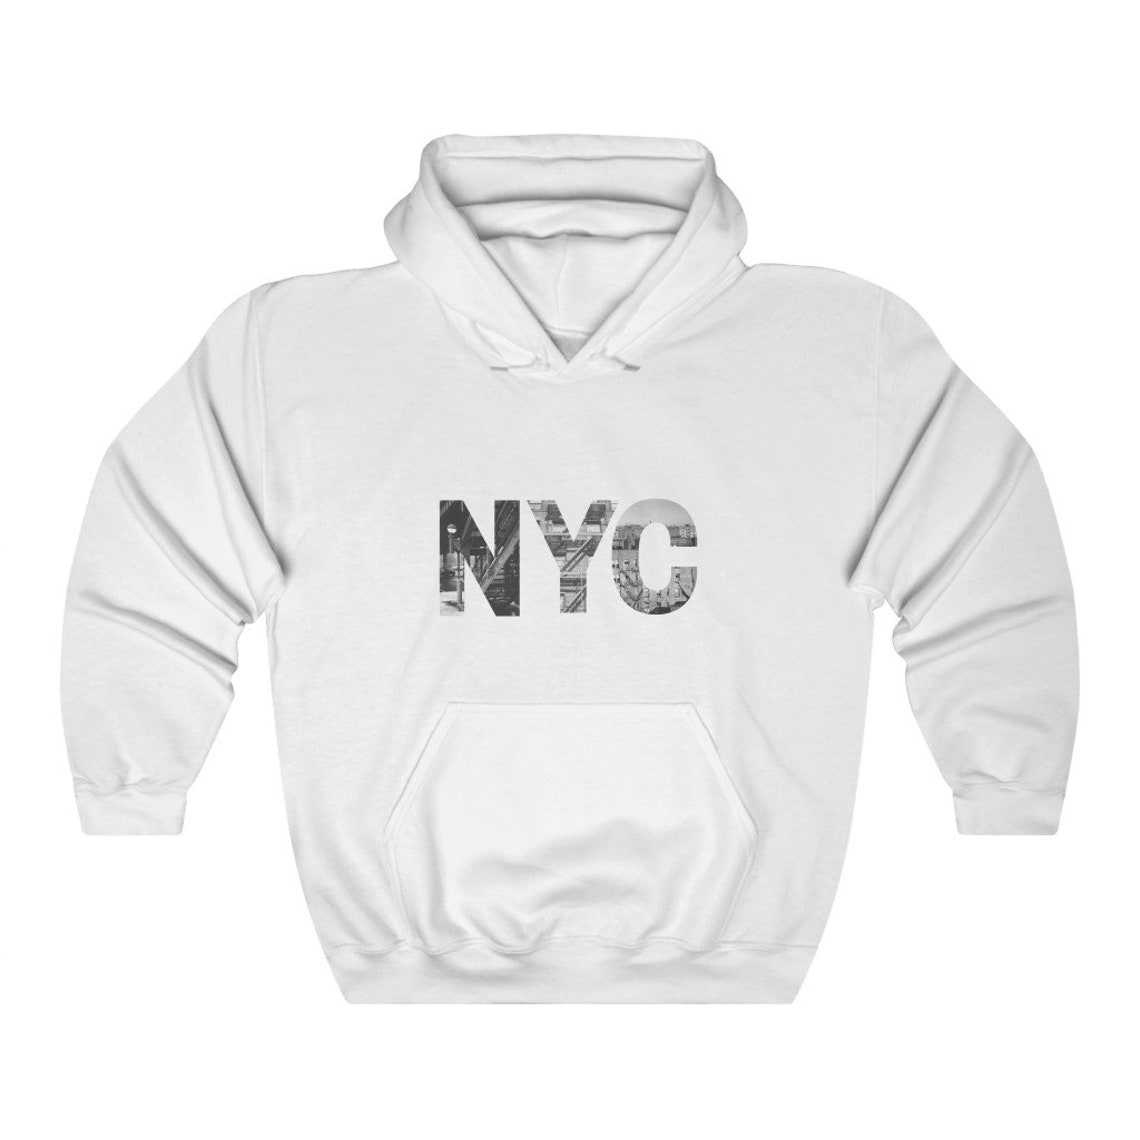 New York City hoodie New Yorker New York gift The Real New | Etsy